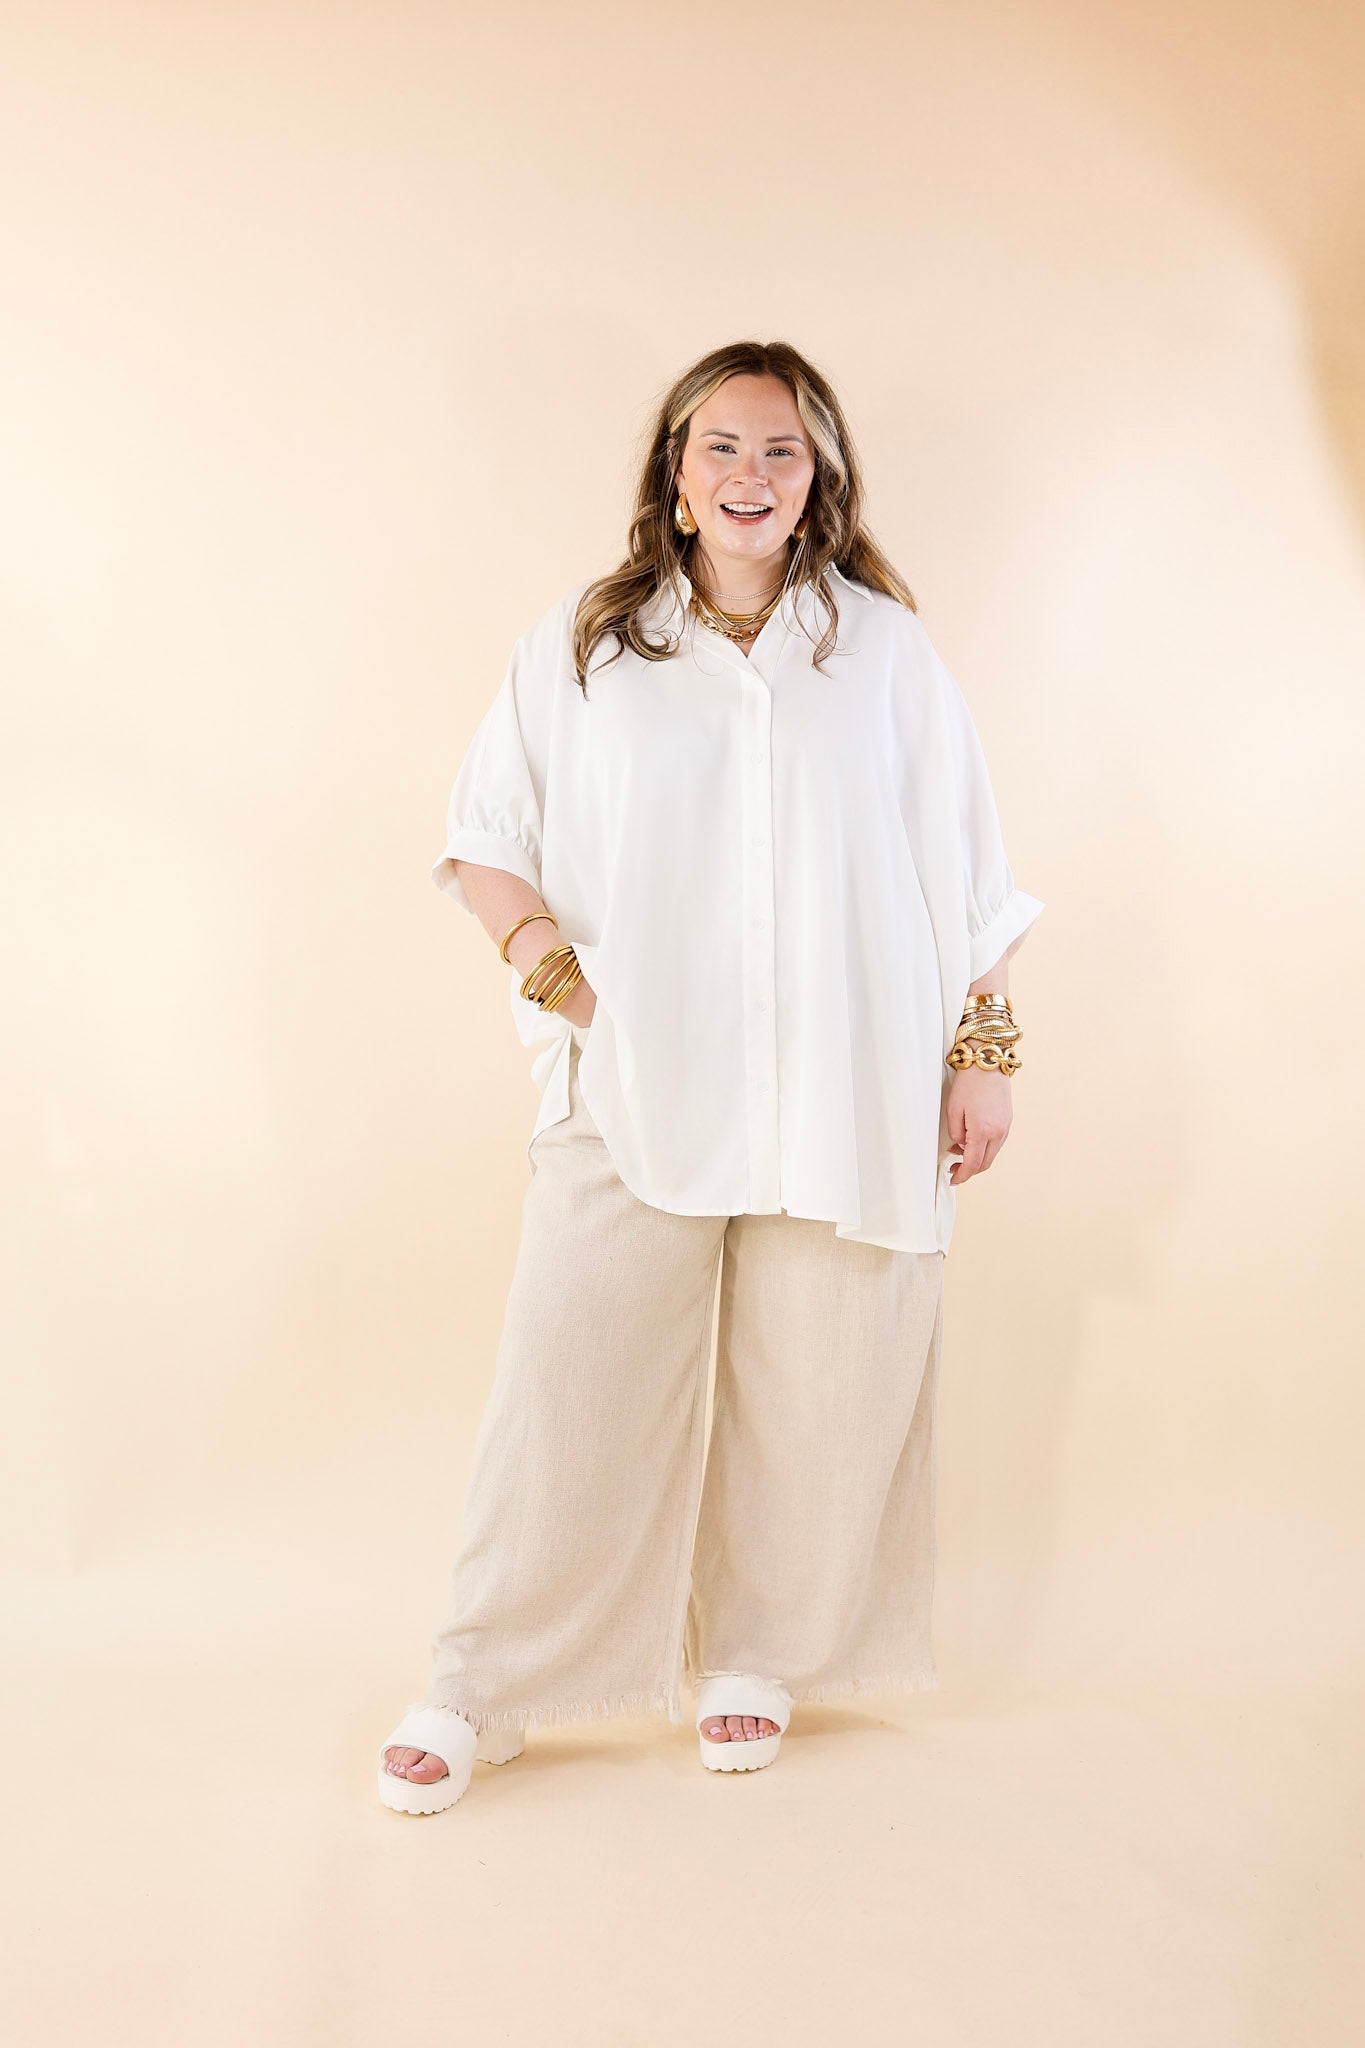 Right On Cue Elastic Waistband Cropped Pants with Frayed Hem in Beige - Giddy Up Glamour Boutique